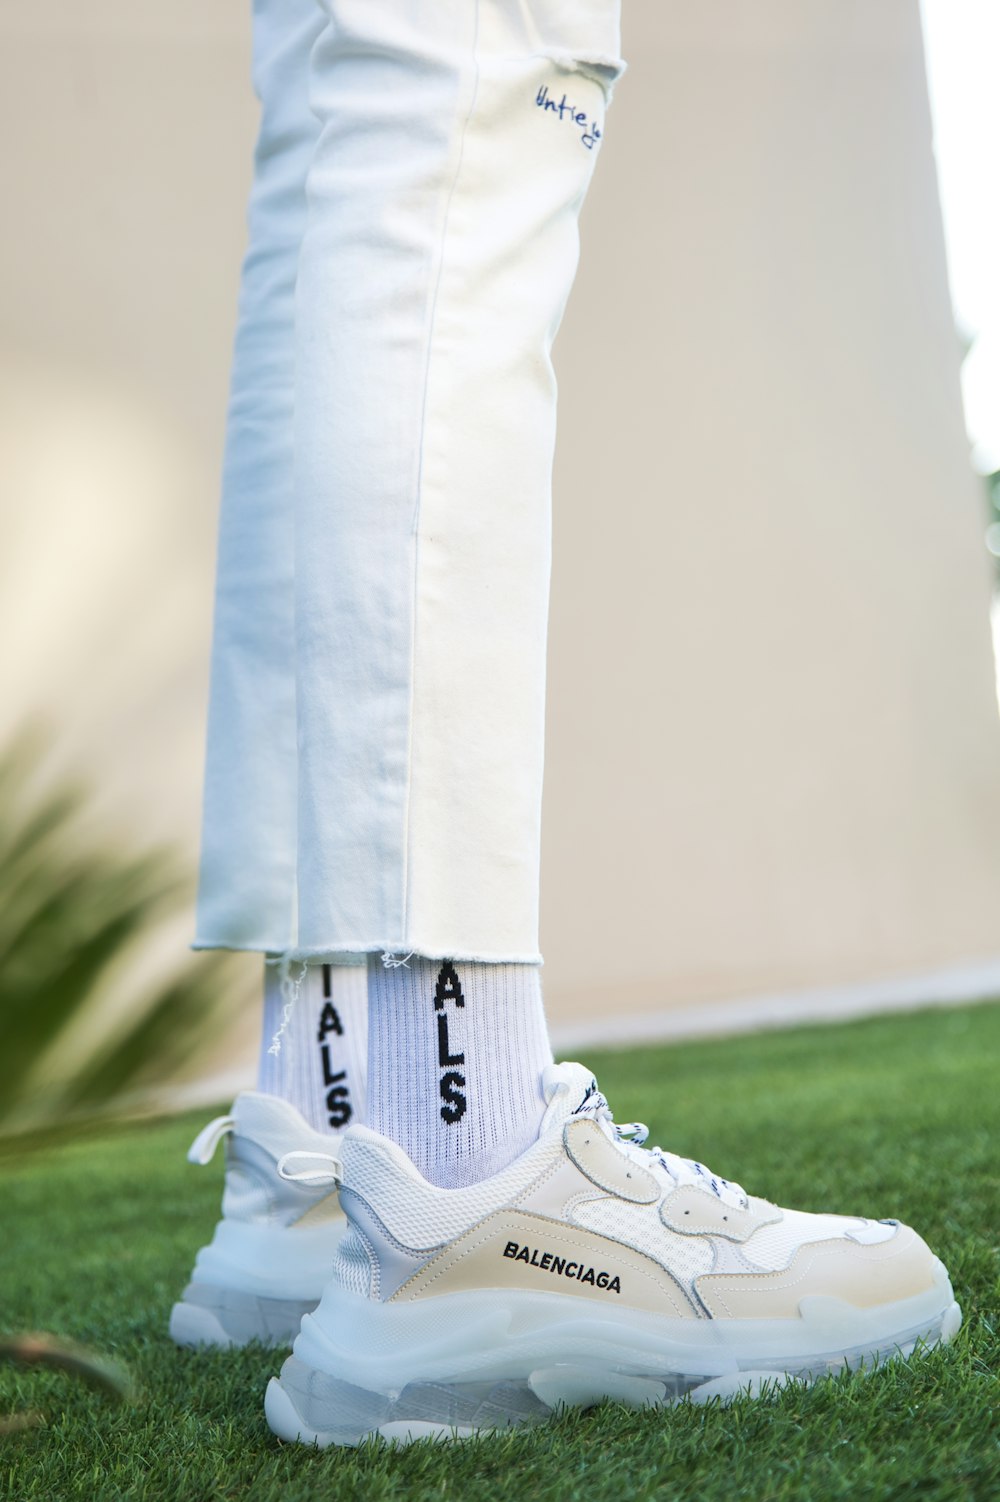 Balenciaga Shoes Pictures | Download Free Images on Unsplash